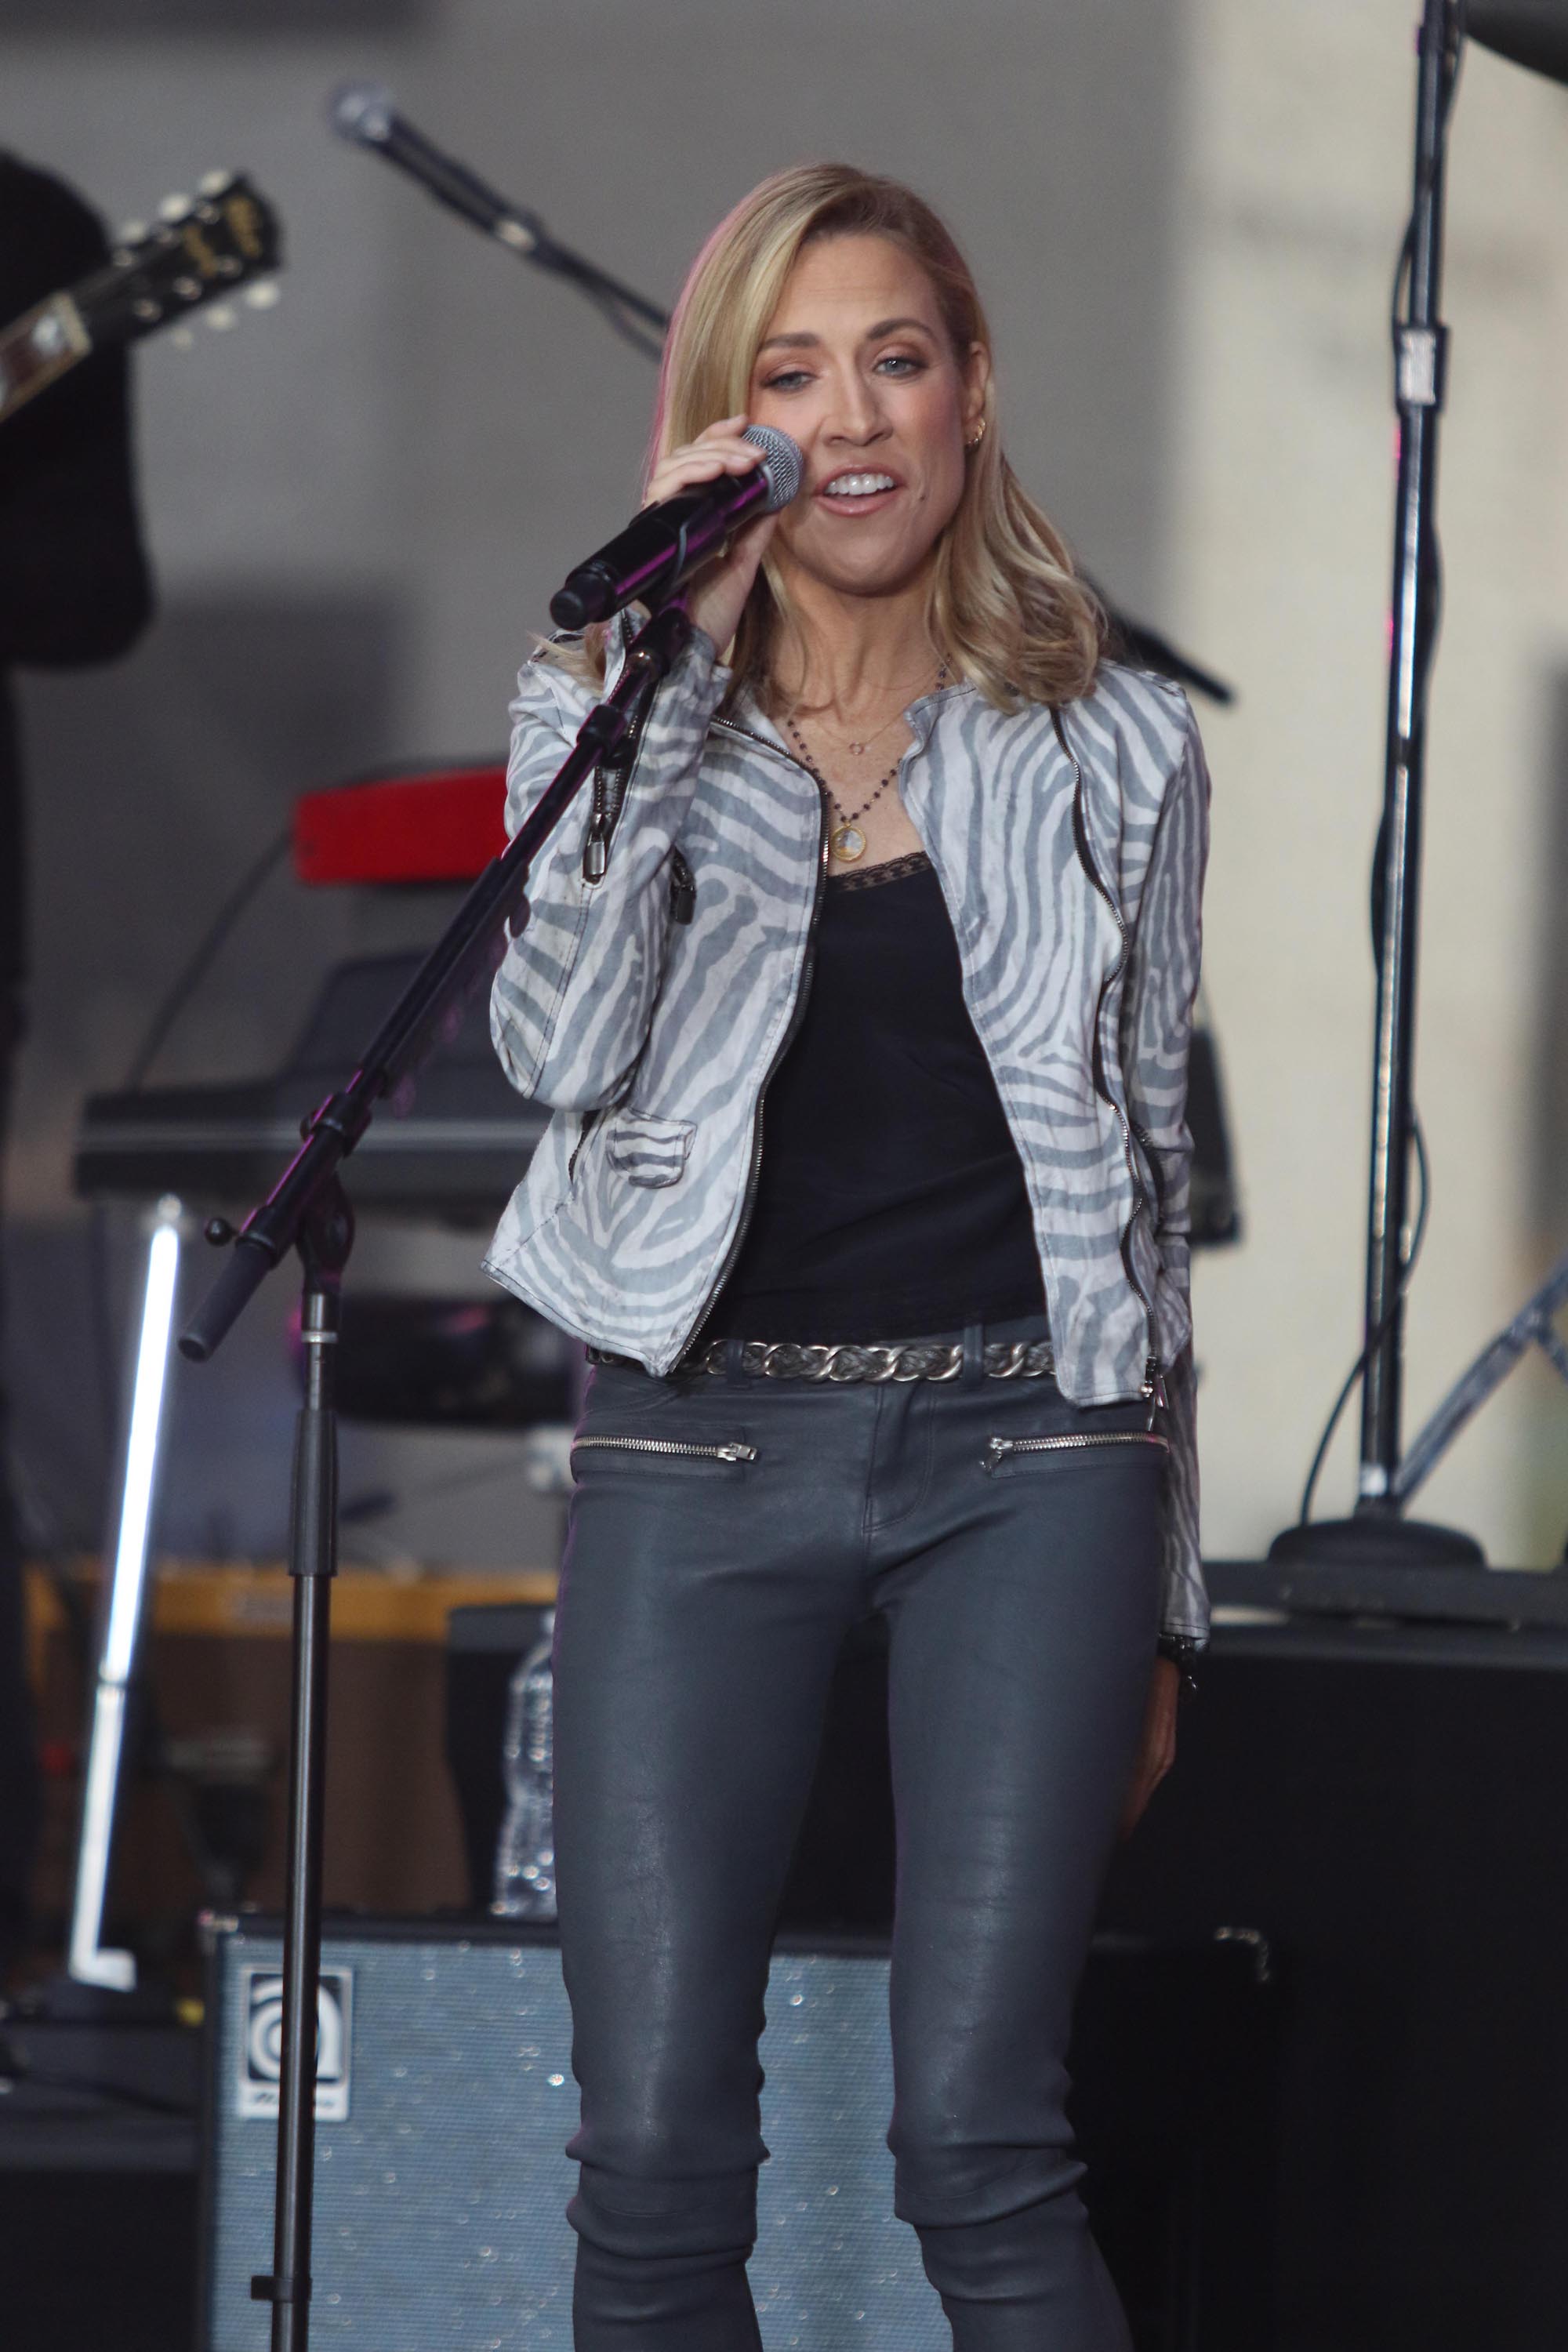 Sheryl Crow NBC performs at Today Show